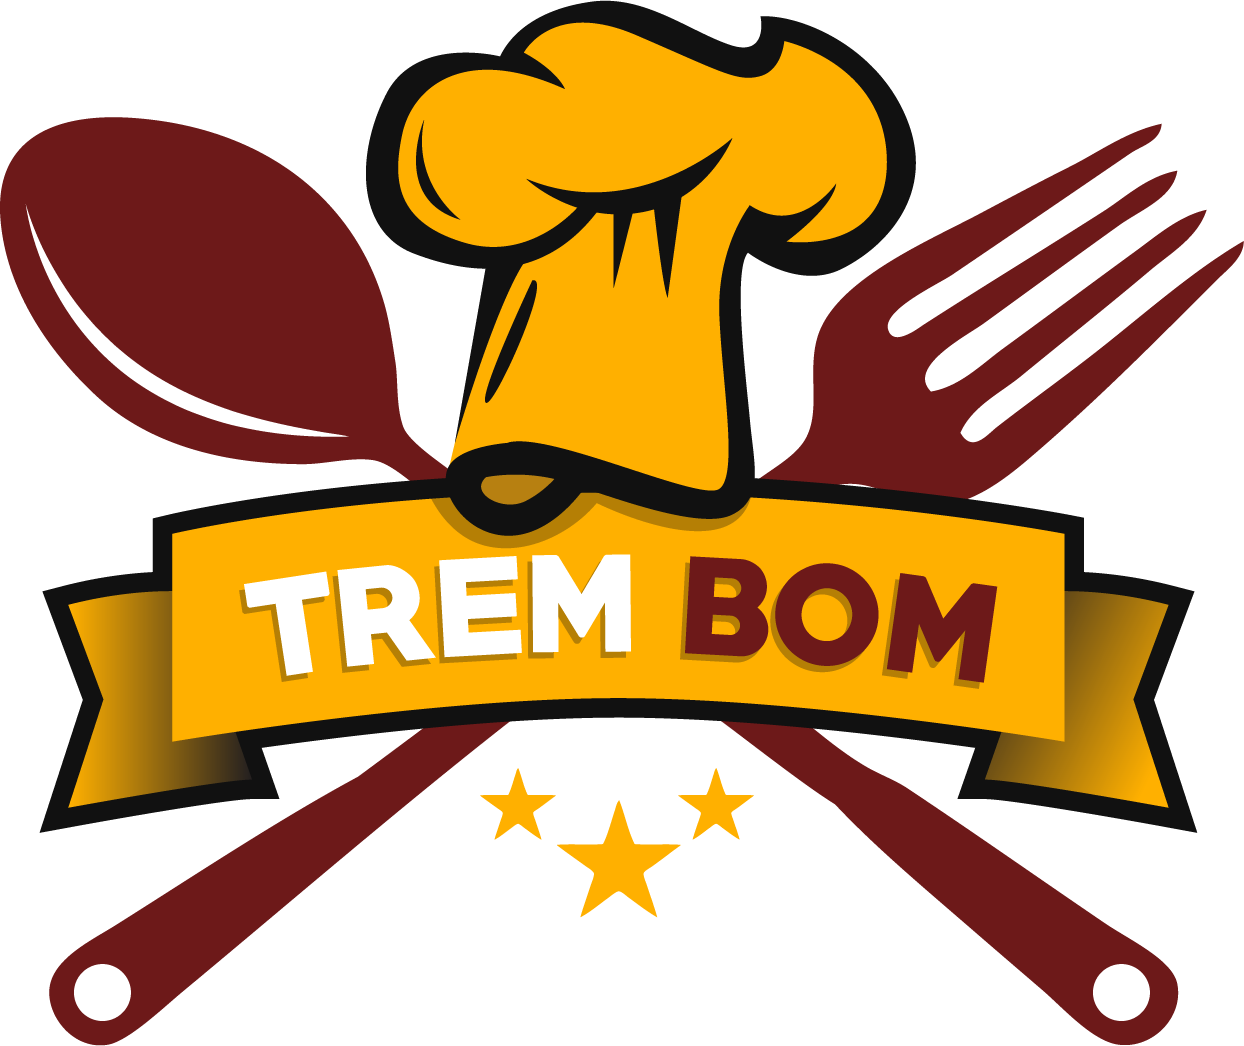 Best Pots and Pans for Electric Stove - TremBom